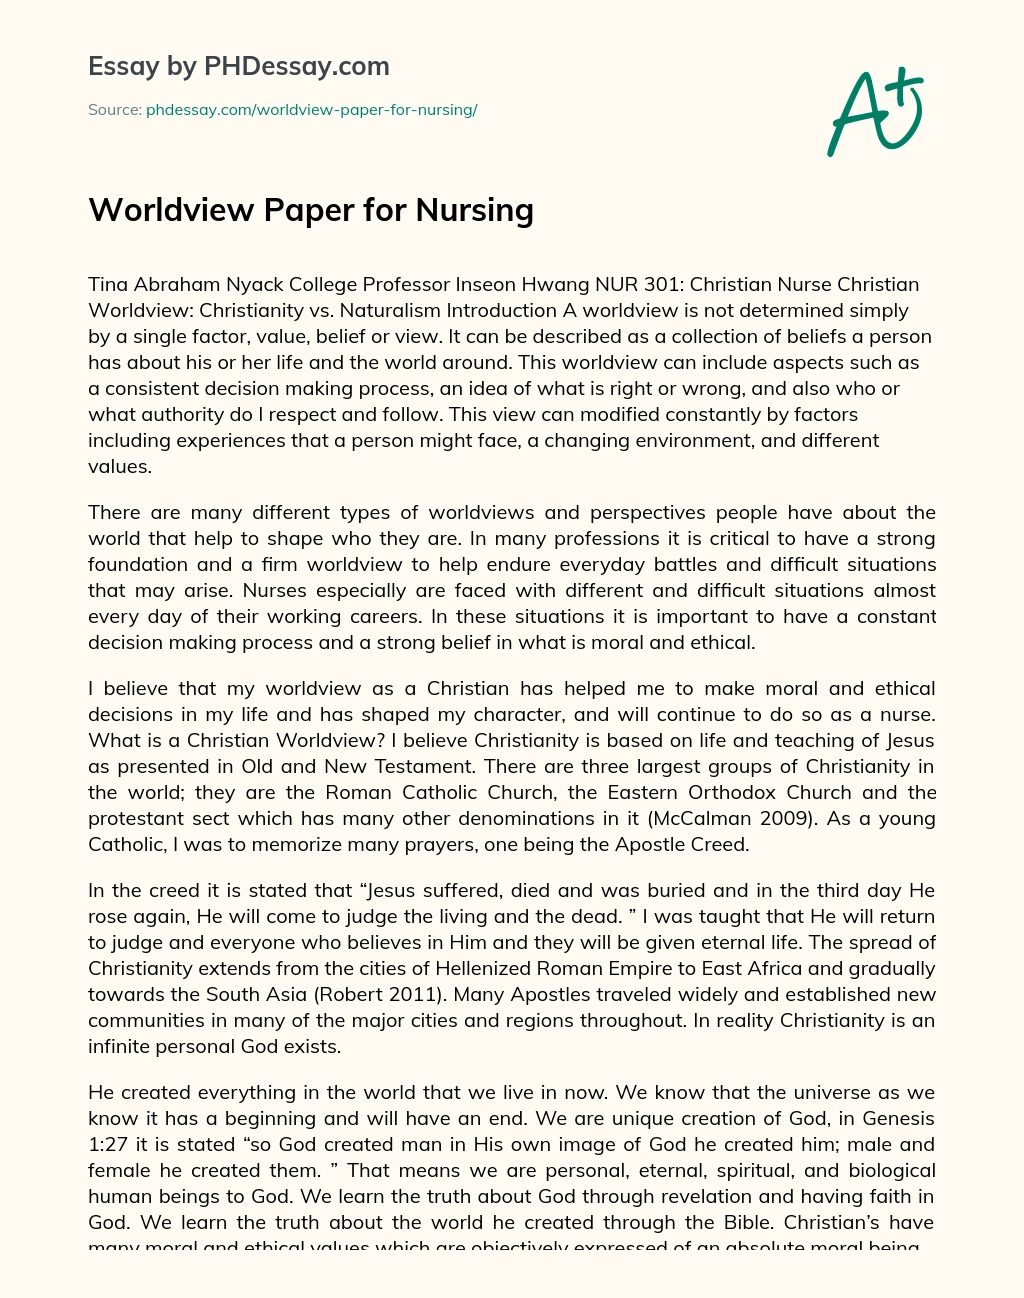 Worldview Paper for Nursing essay